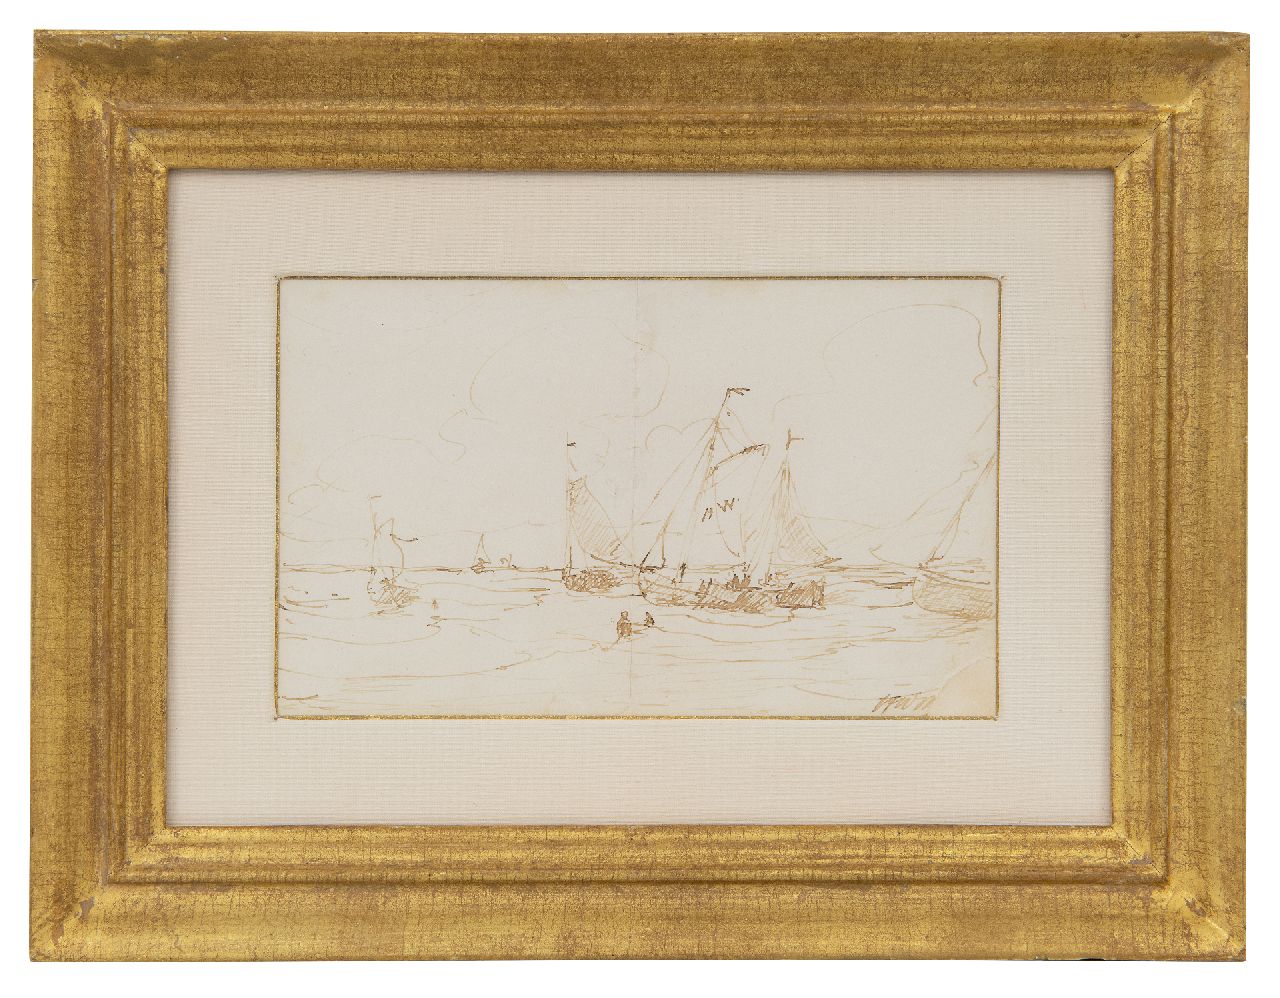 Mesdag H.W.  | Hendrik Willem Mesdag, Lineman and bomb barges in the surf, pen and ink on paper 11.5 x 18.0 cm, signed l.r. with initials